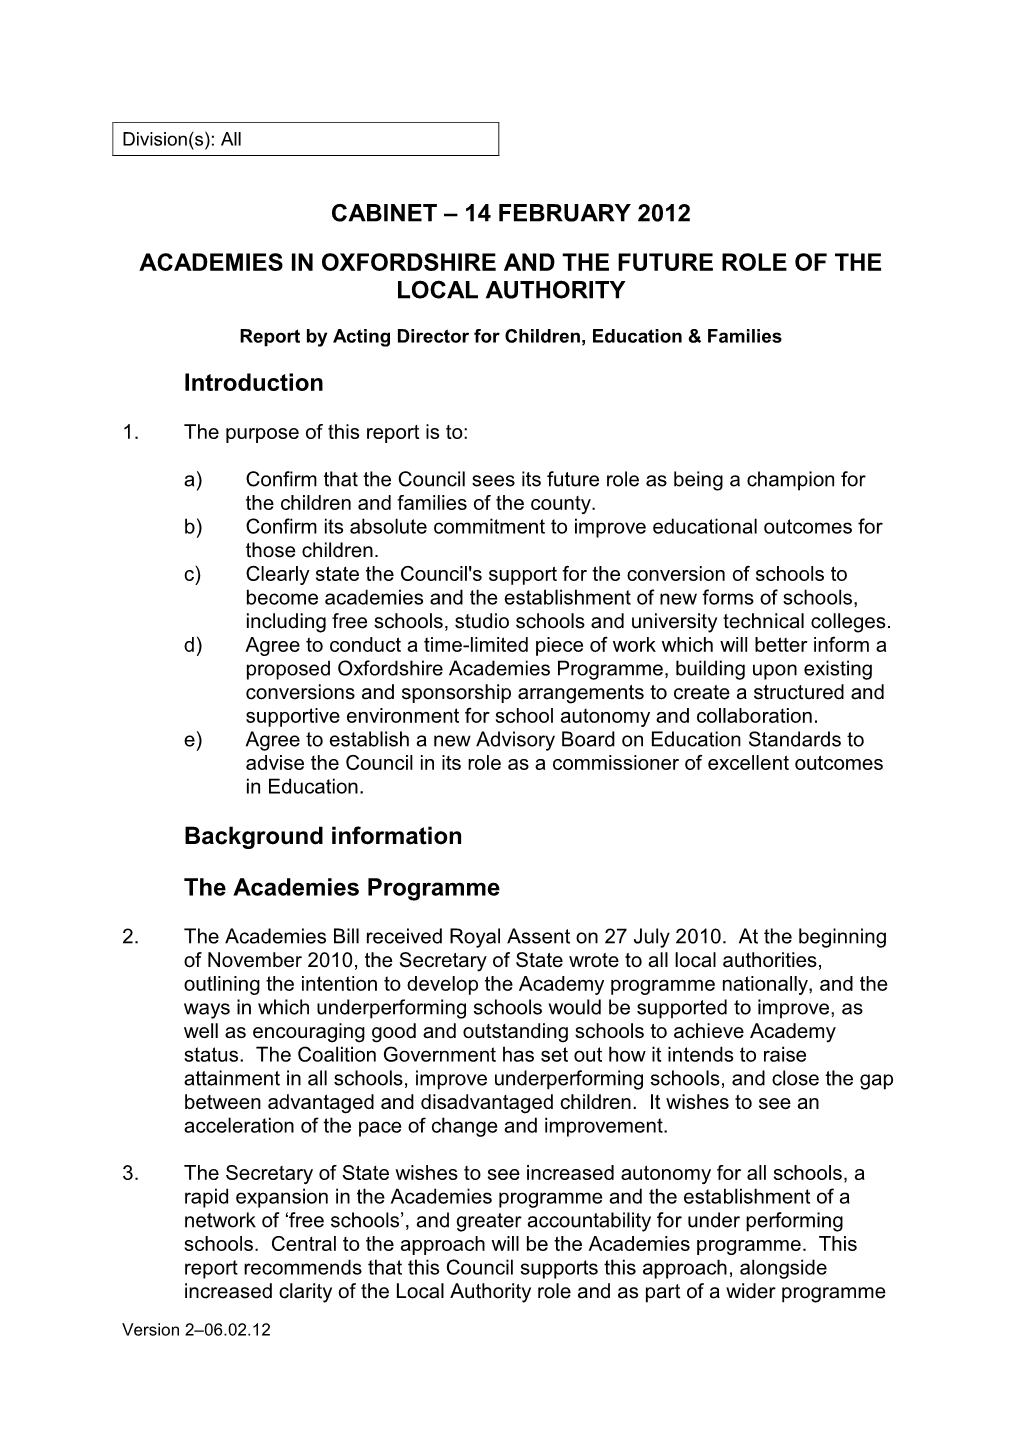 14 FEBRUARY 2012 ACADEMIES in OXFORDSHIRE and the FUTURE ROLE of the LOCAL AUTHORITY Introduction Background Informa